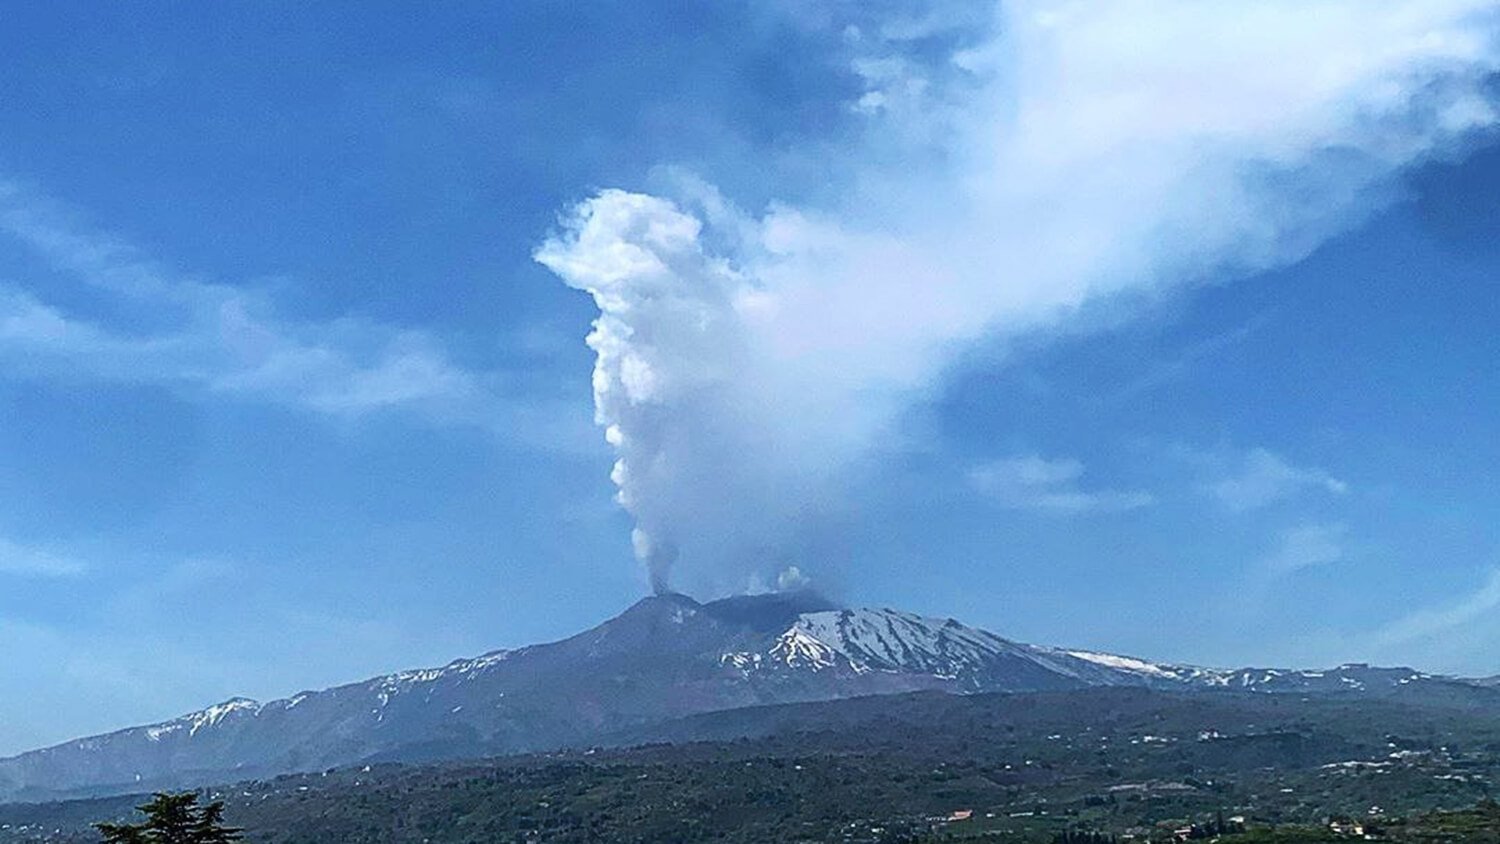 Italy woke up the largest volcano in Europe